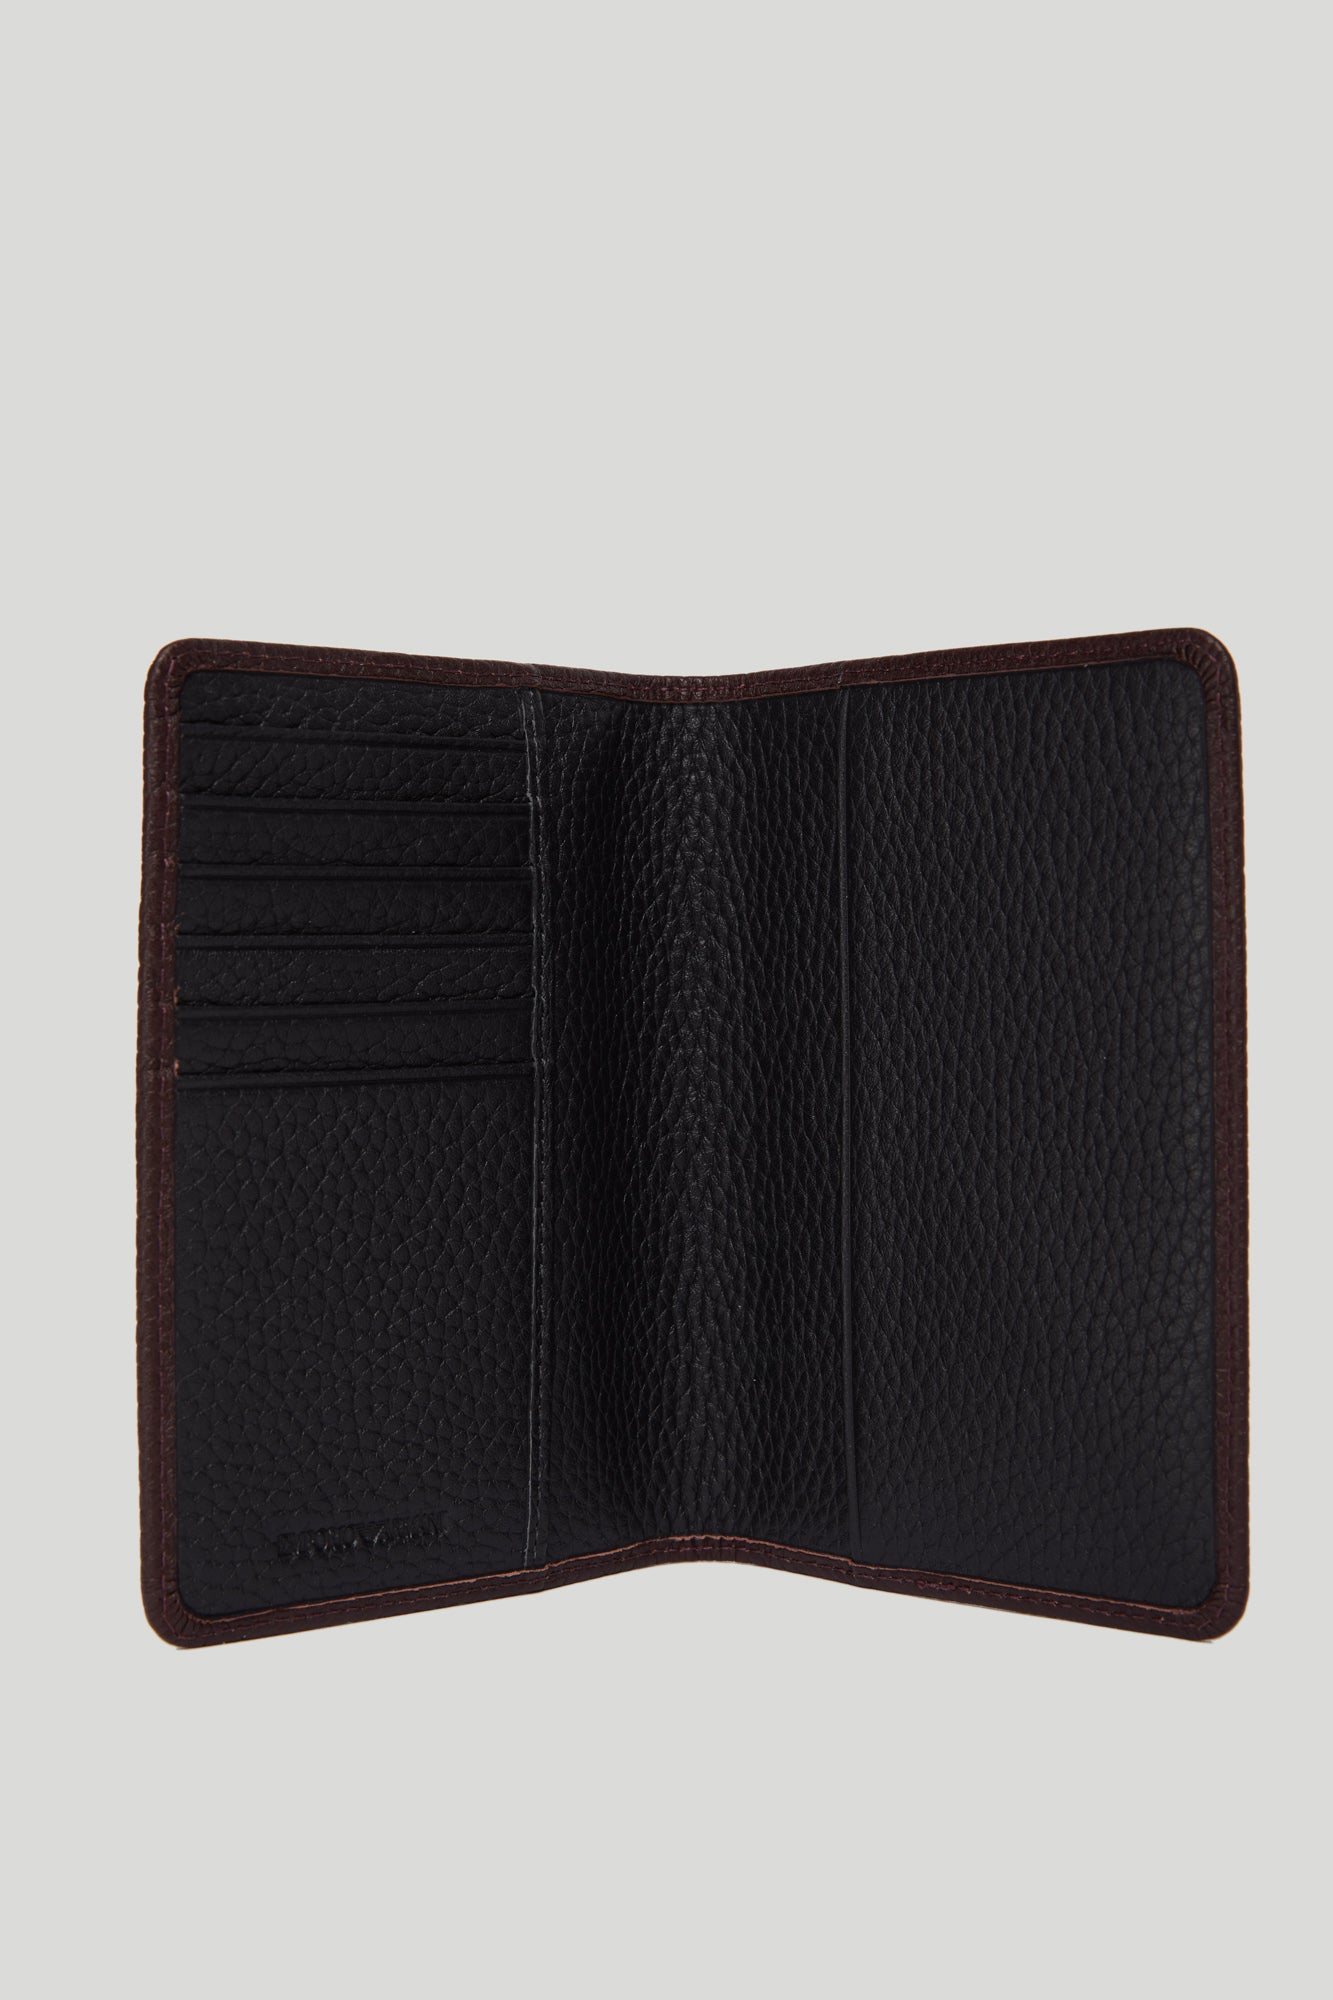 EMPORIO ARMANI Document holder in brown leather